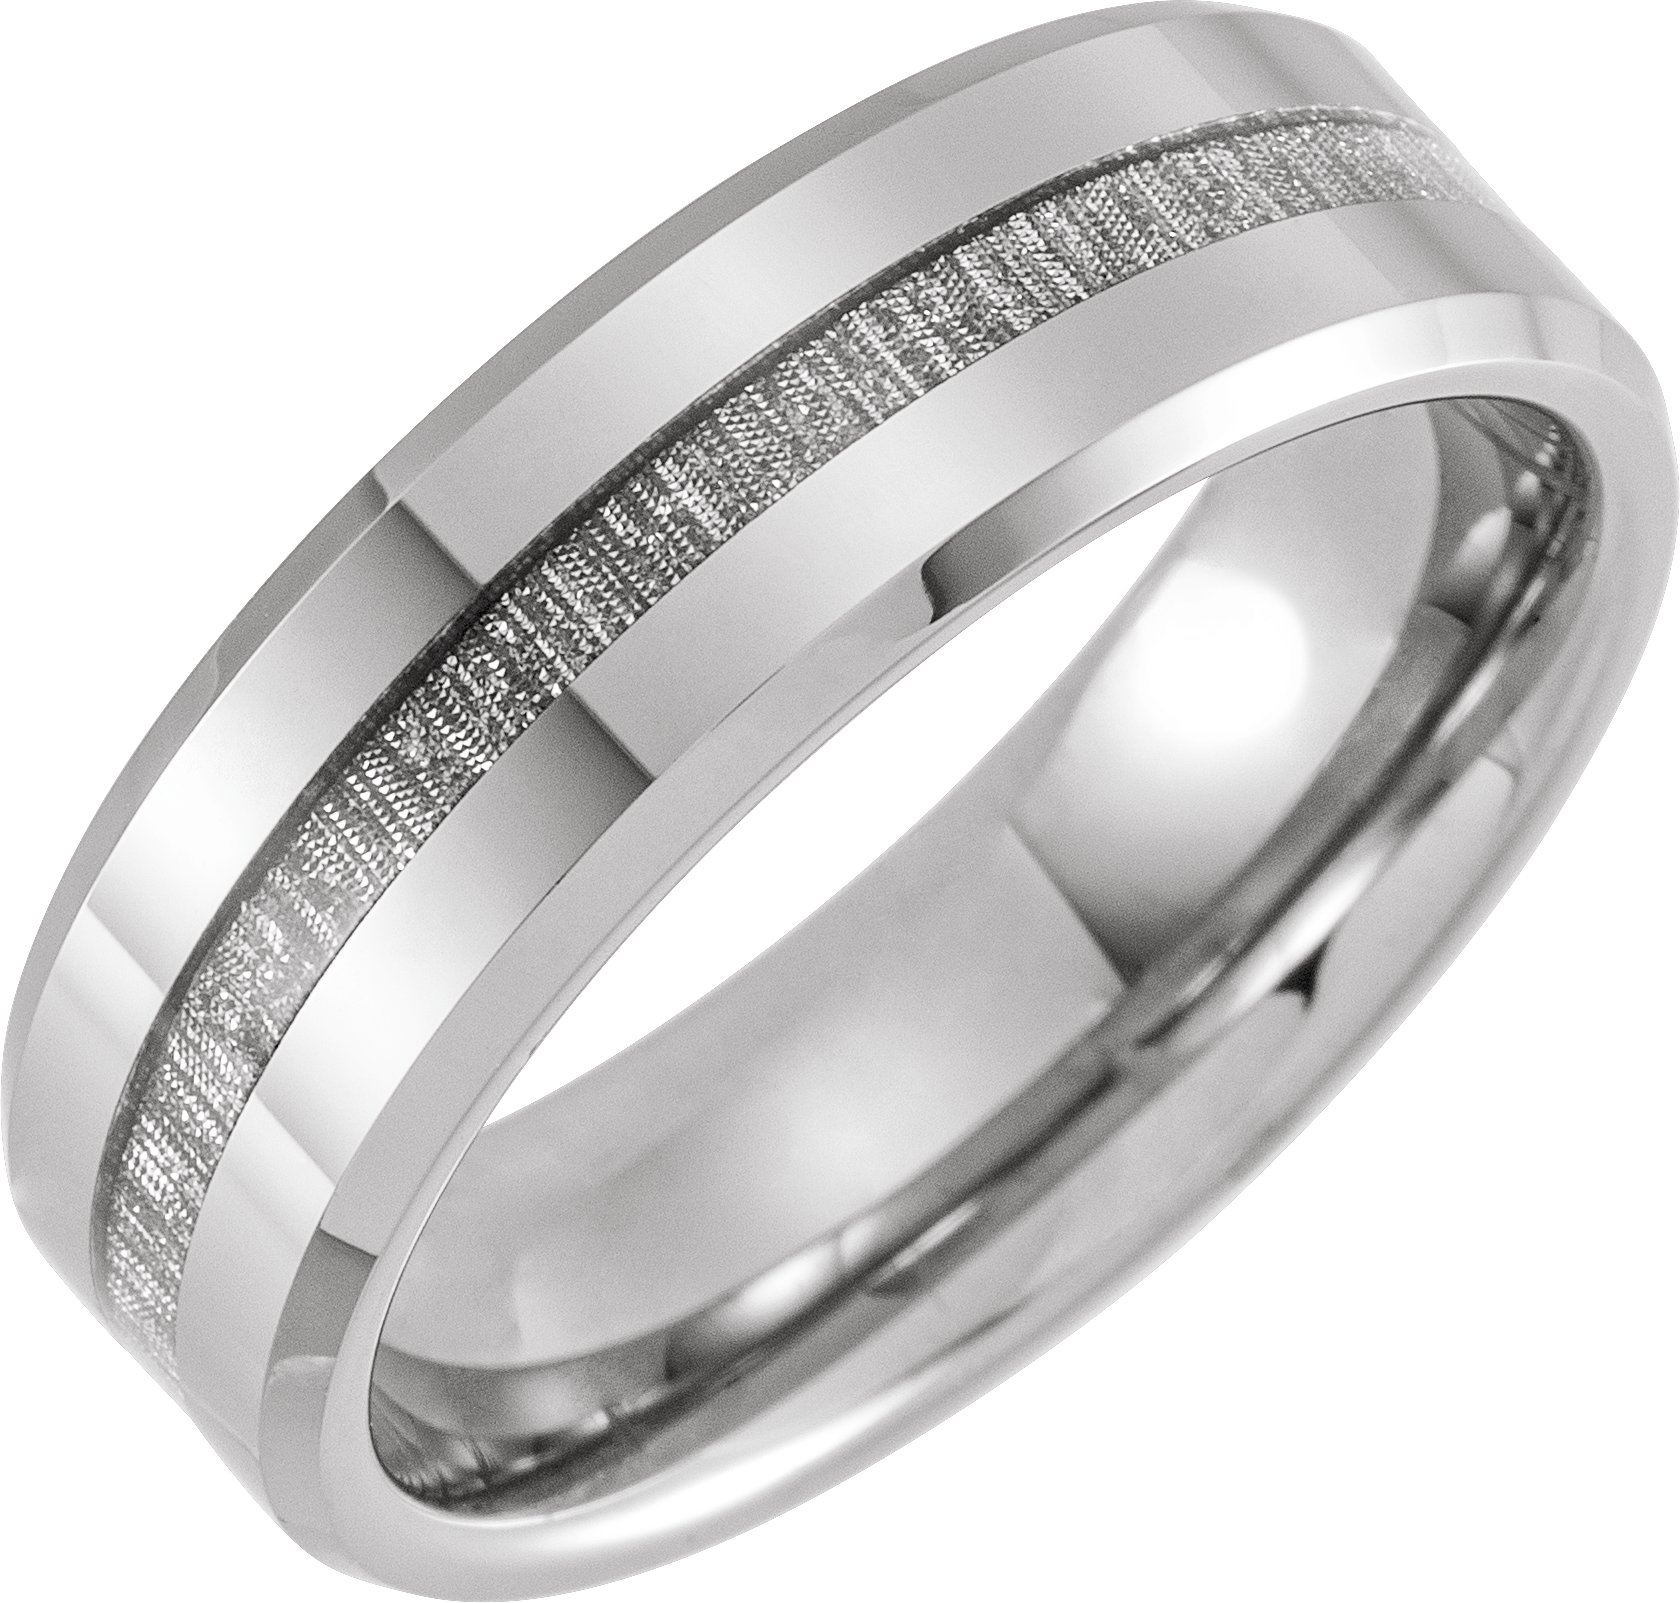 Tungsten 8 mm Beveled Band with Manmade Meteorite Inlay Size 8.5